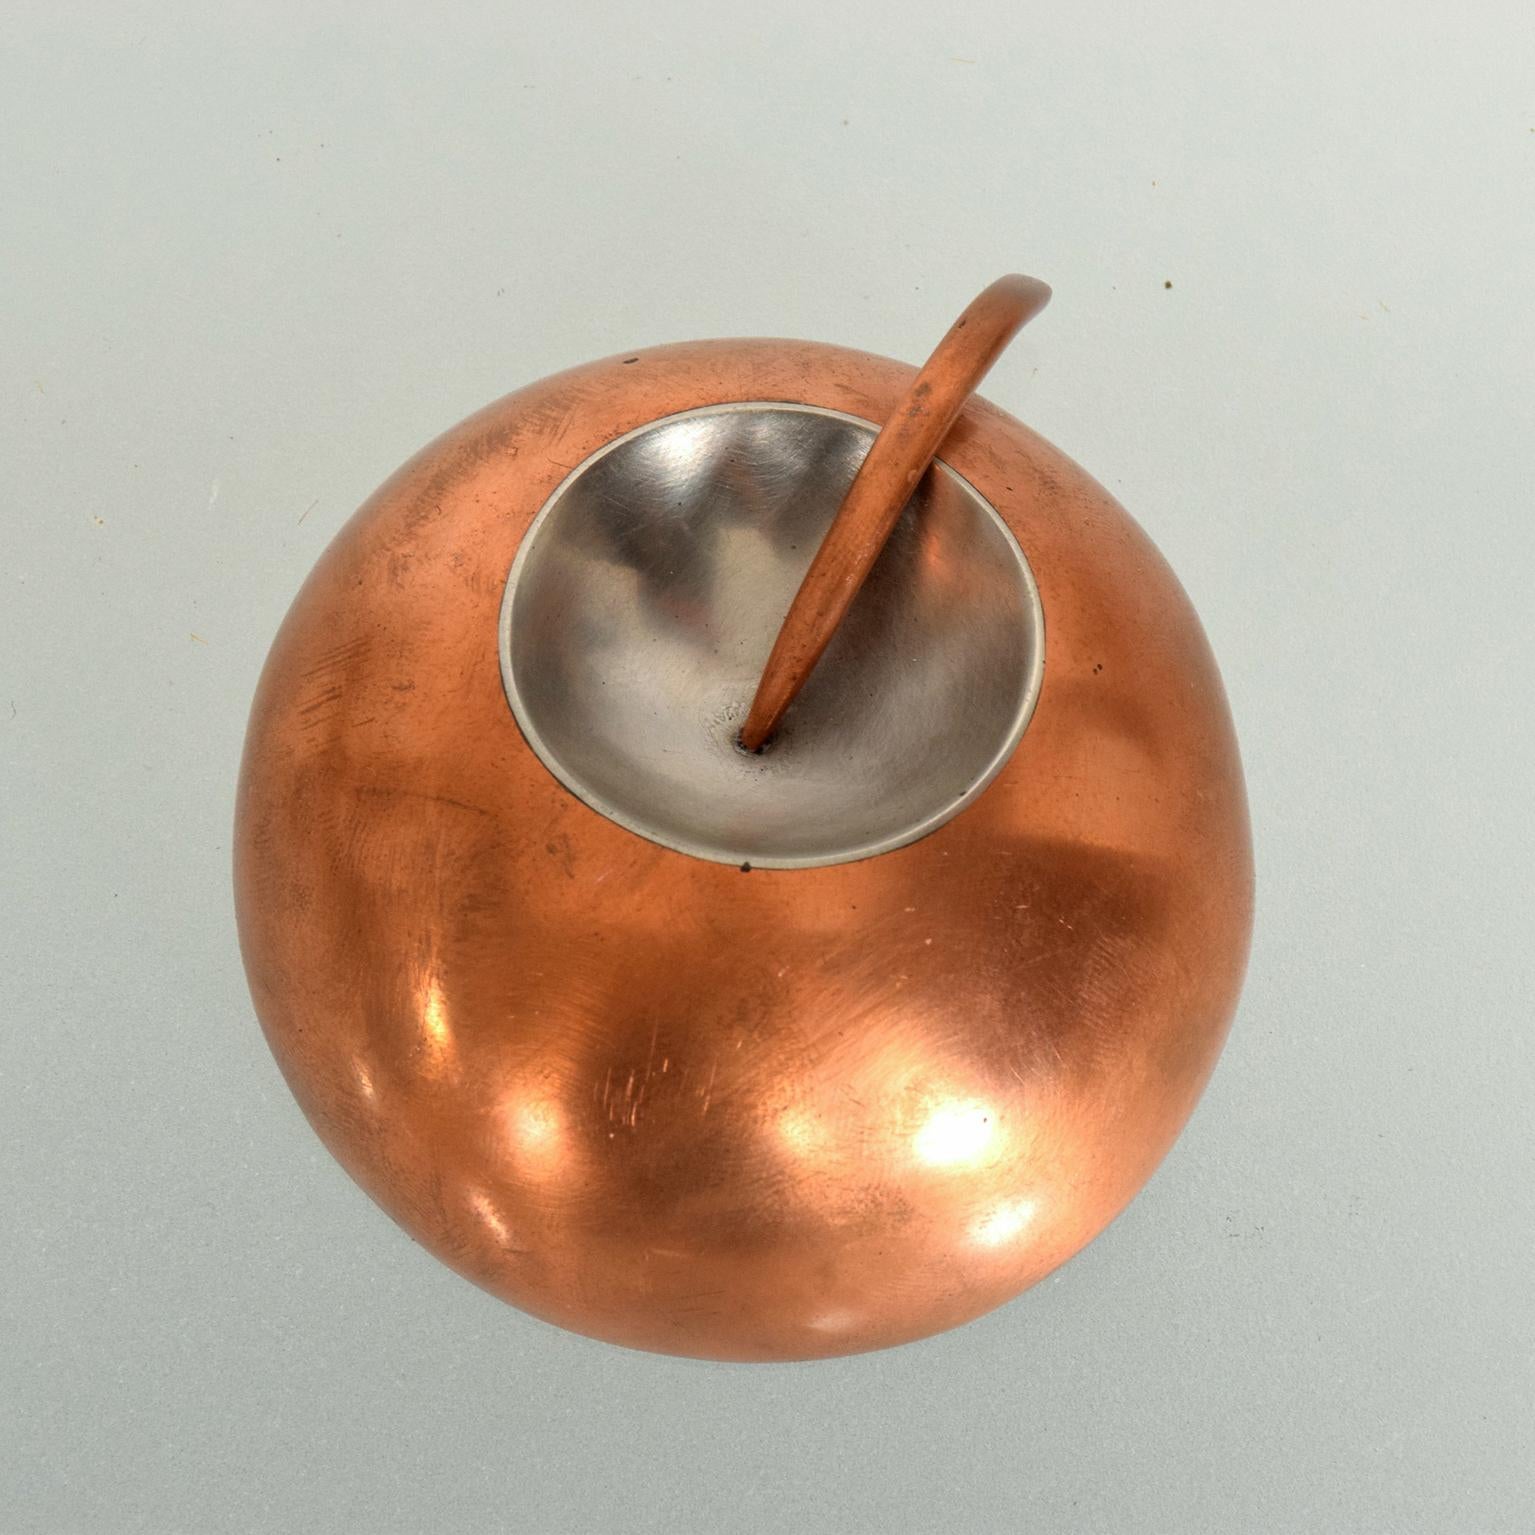 In the style of Alexander Calder Mid-Century Modernist metal jewelry Art a Modern Copper and Stainless Steel Brooch.

Pin is unmarked. Mid-Century Modern, 1960s

Dimensions: 1